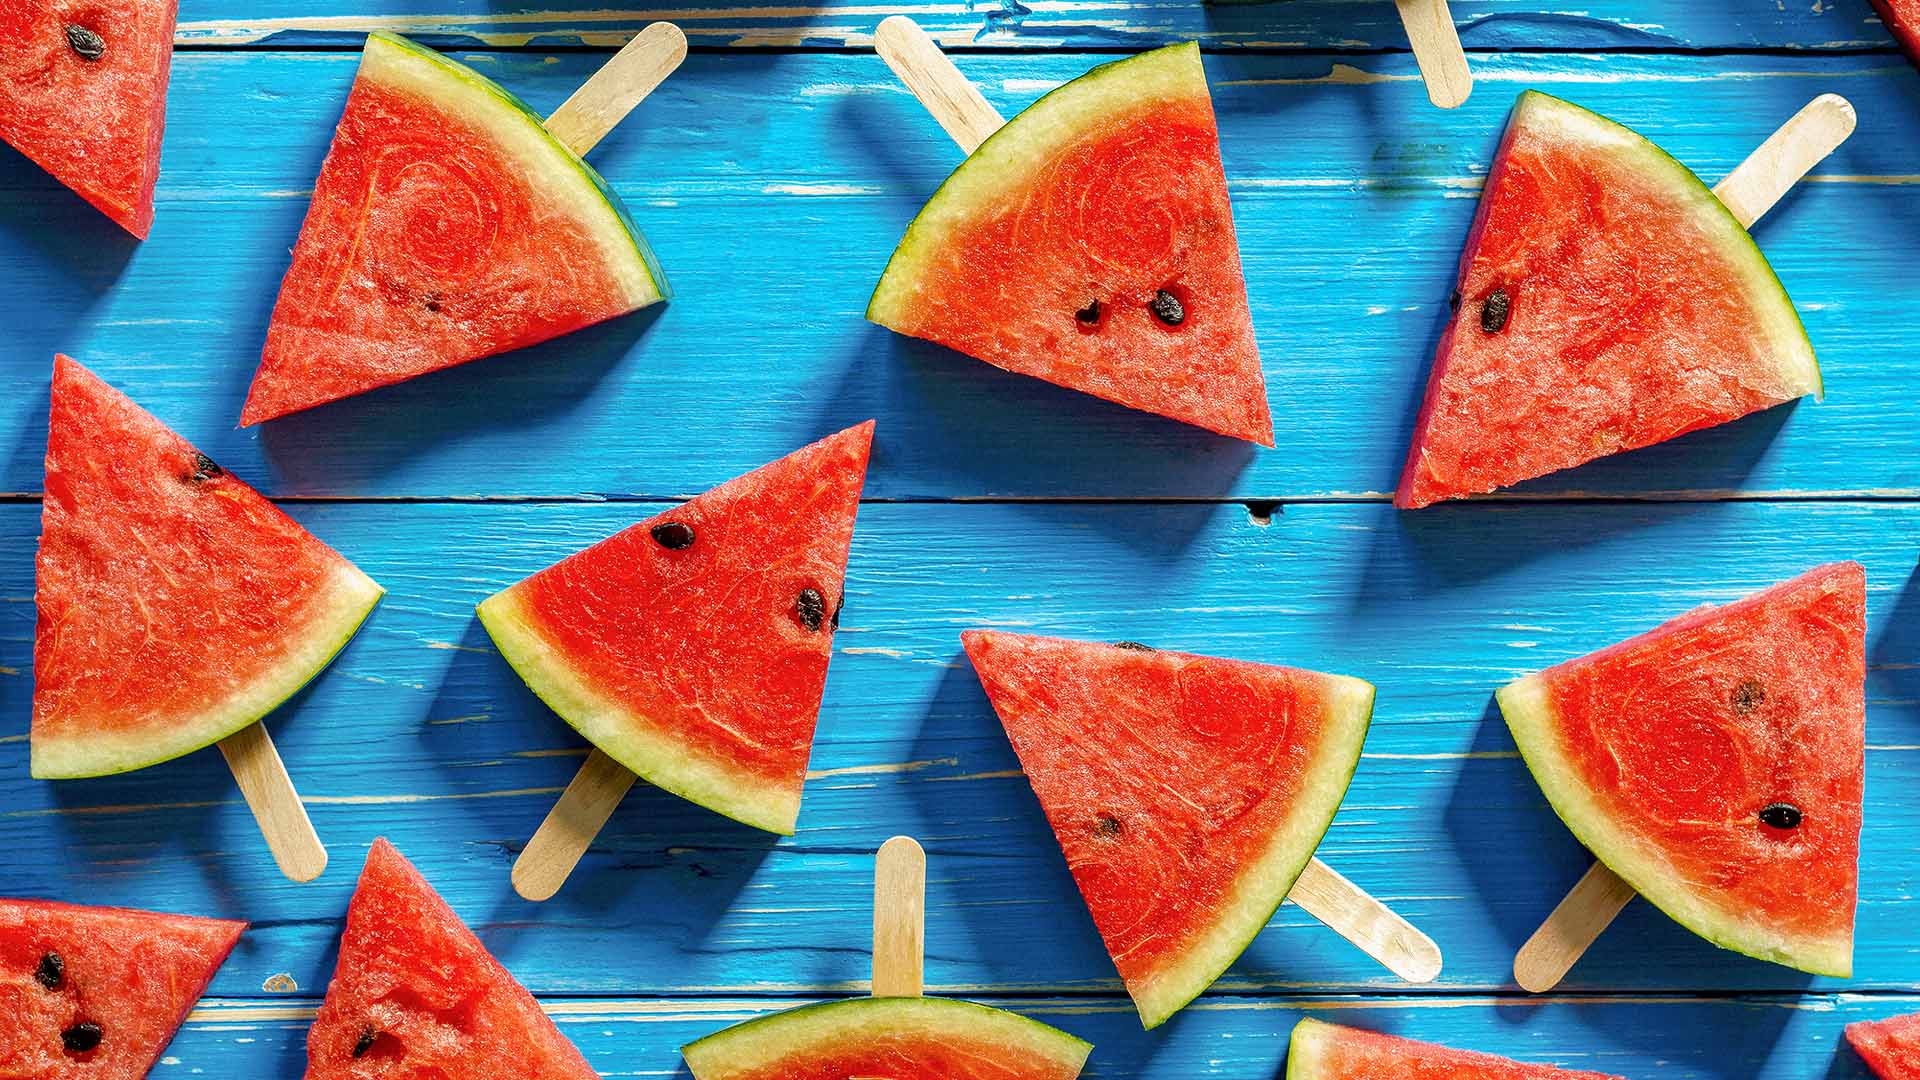 several watermelon slices with popsicle sticks arranged on a blue wooden surface